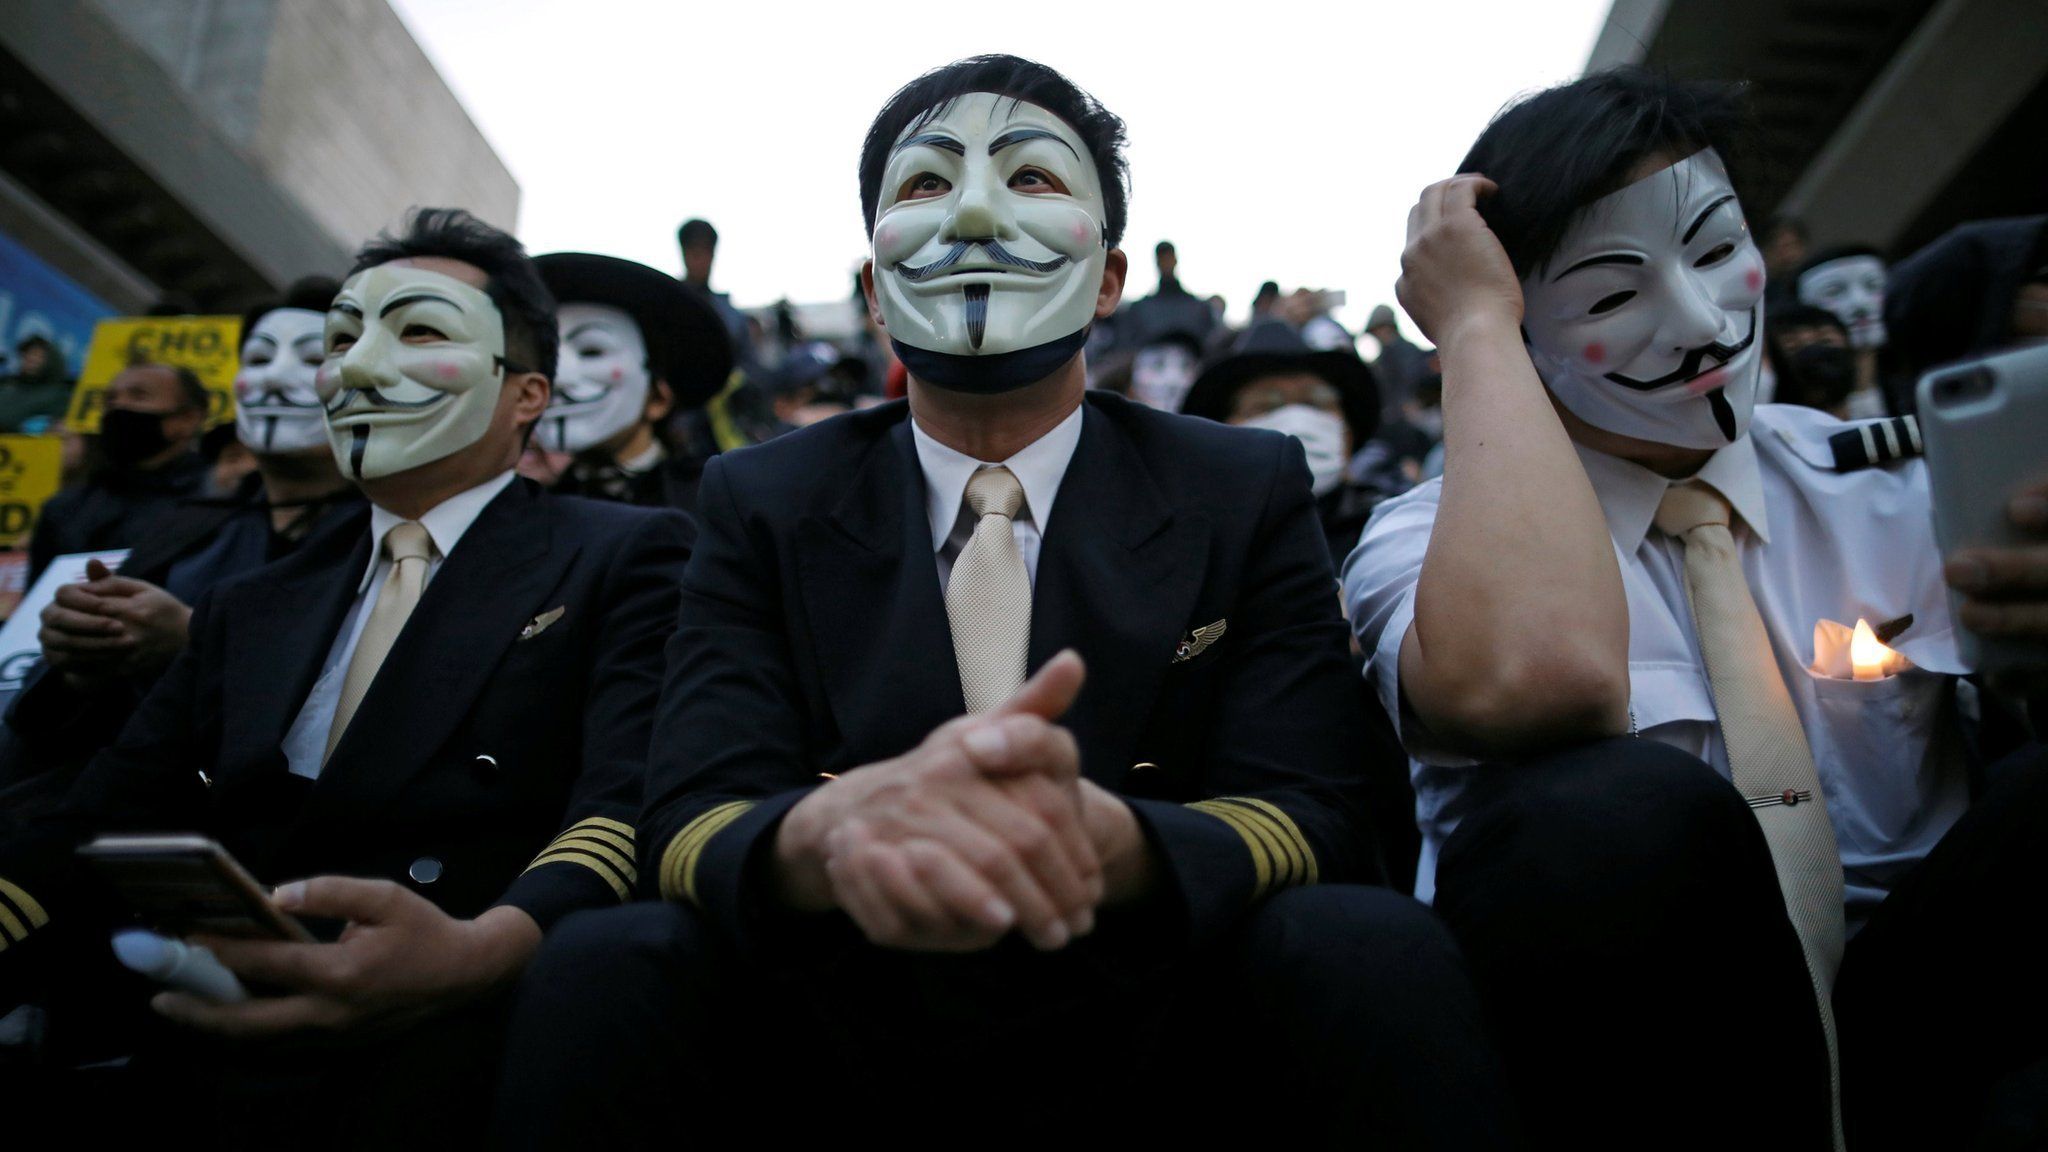 Korean Air pilots take part in a protest against abuses of power by the company's controlling family in central Seoul, South Korea, 4 May 2018